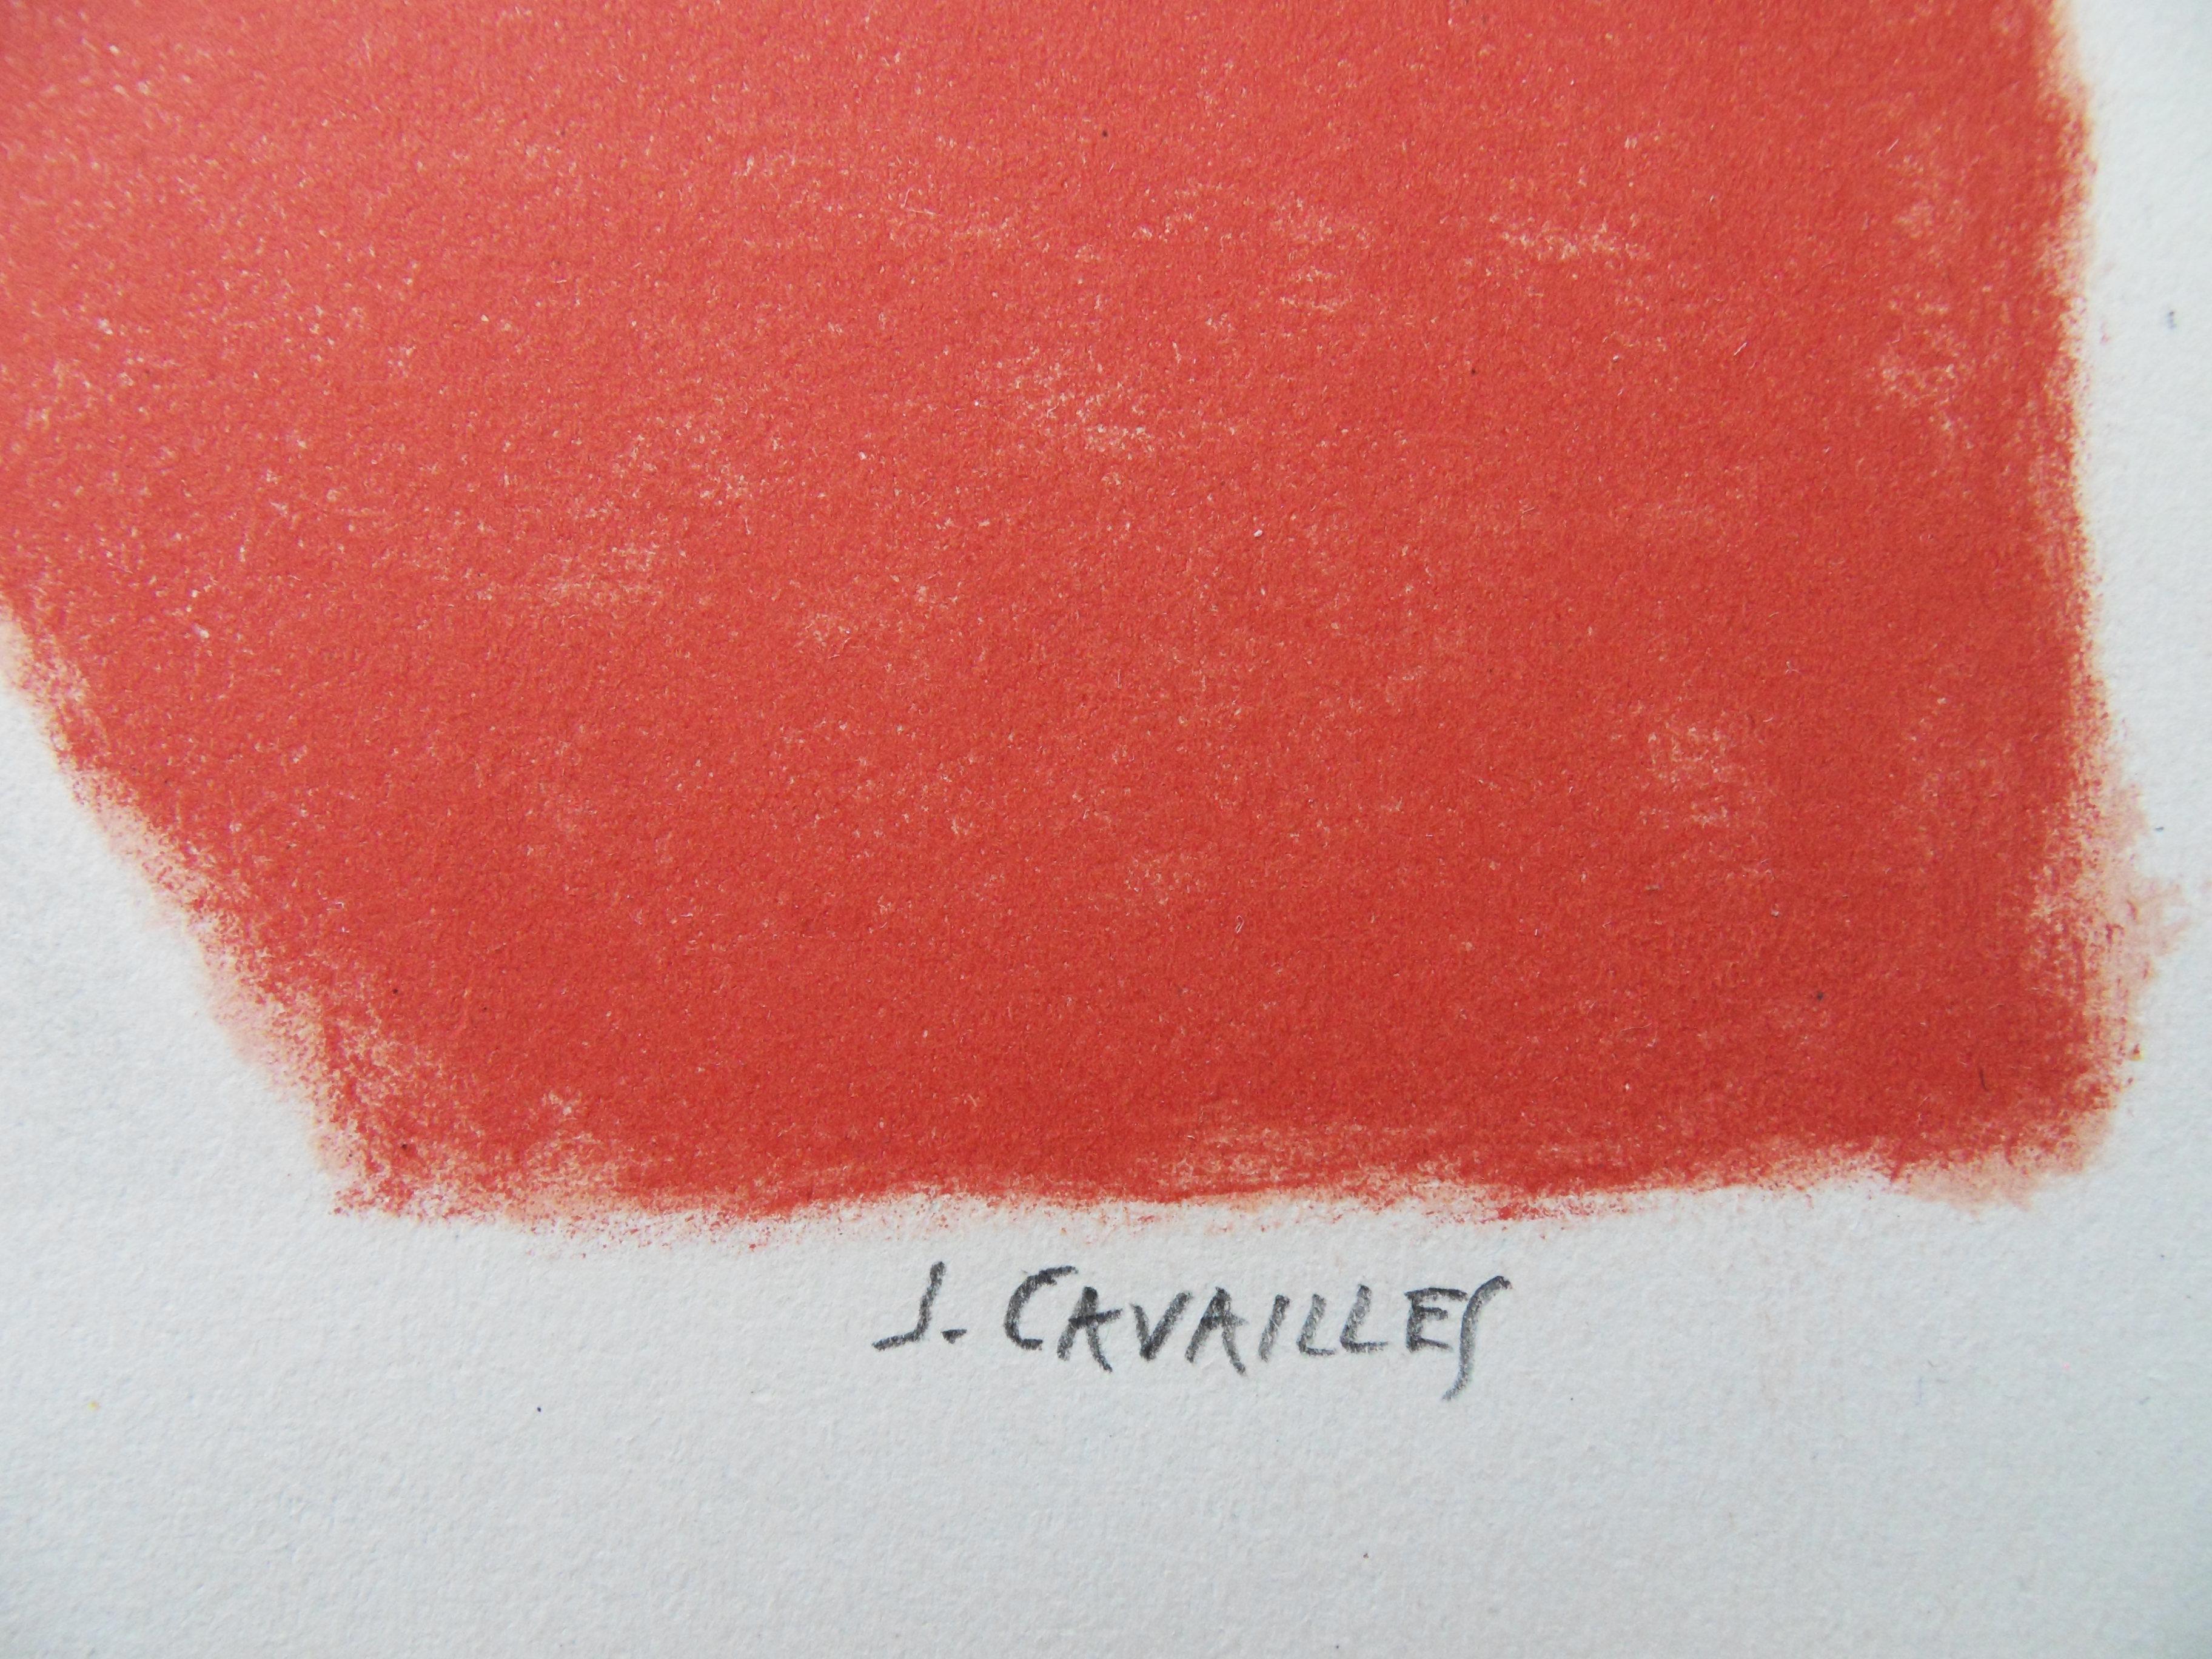 Jules CAVAILLES
Fruits and Flowers on Red Background

Original lithograph
Handsigned in pencil
Justified EA (artist proof)
On Arches vellum 33 x 50 cm (c. 13 x 20 in)

Excellent condition